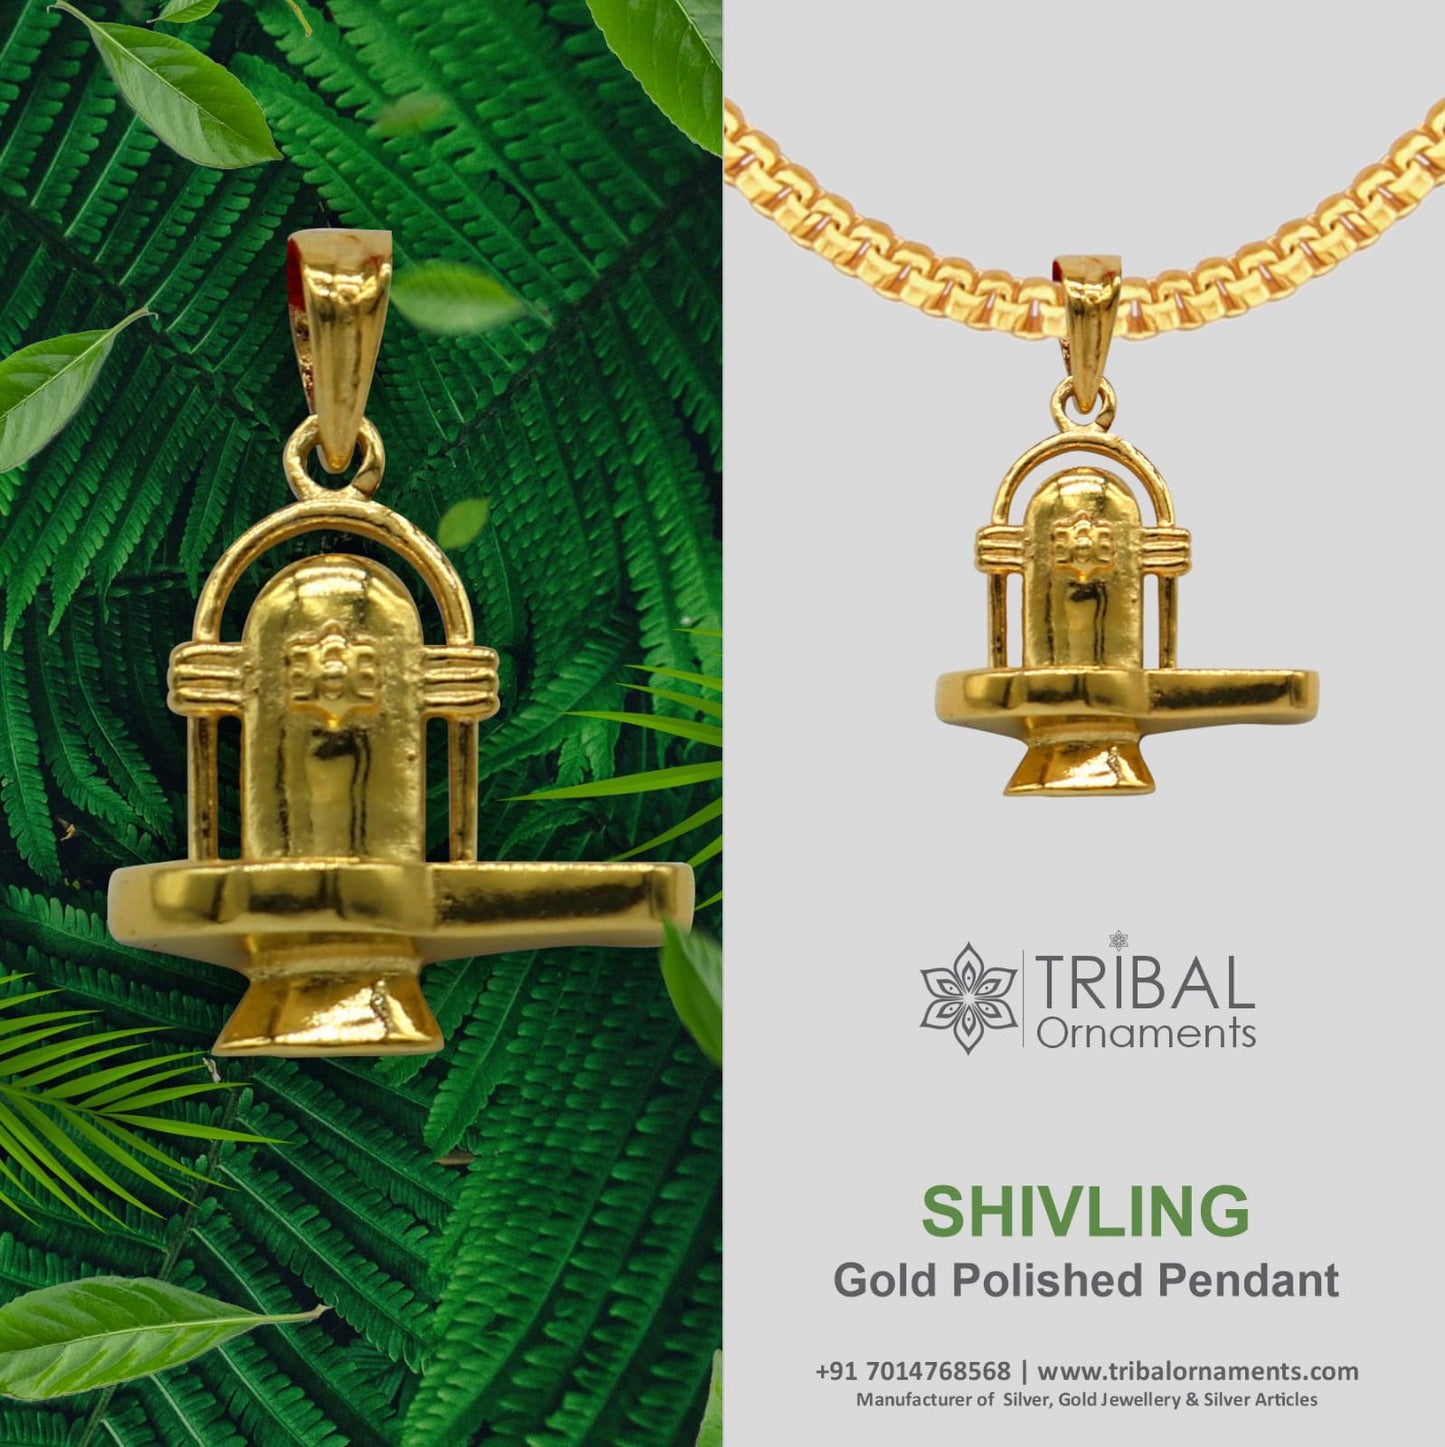 925 sterling silver amazing designer idol Lord Shiva lingam pendant, excellent gifting Gold polished locket pendant gifitng jewelry NSP607 - TRIBAL ORNAMENTS